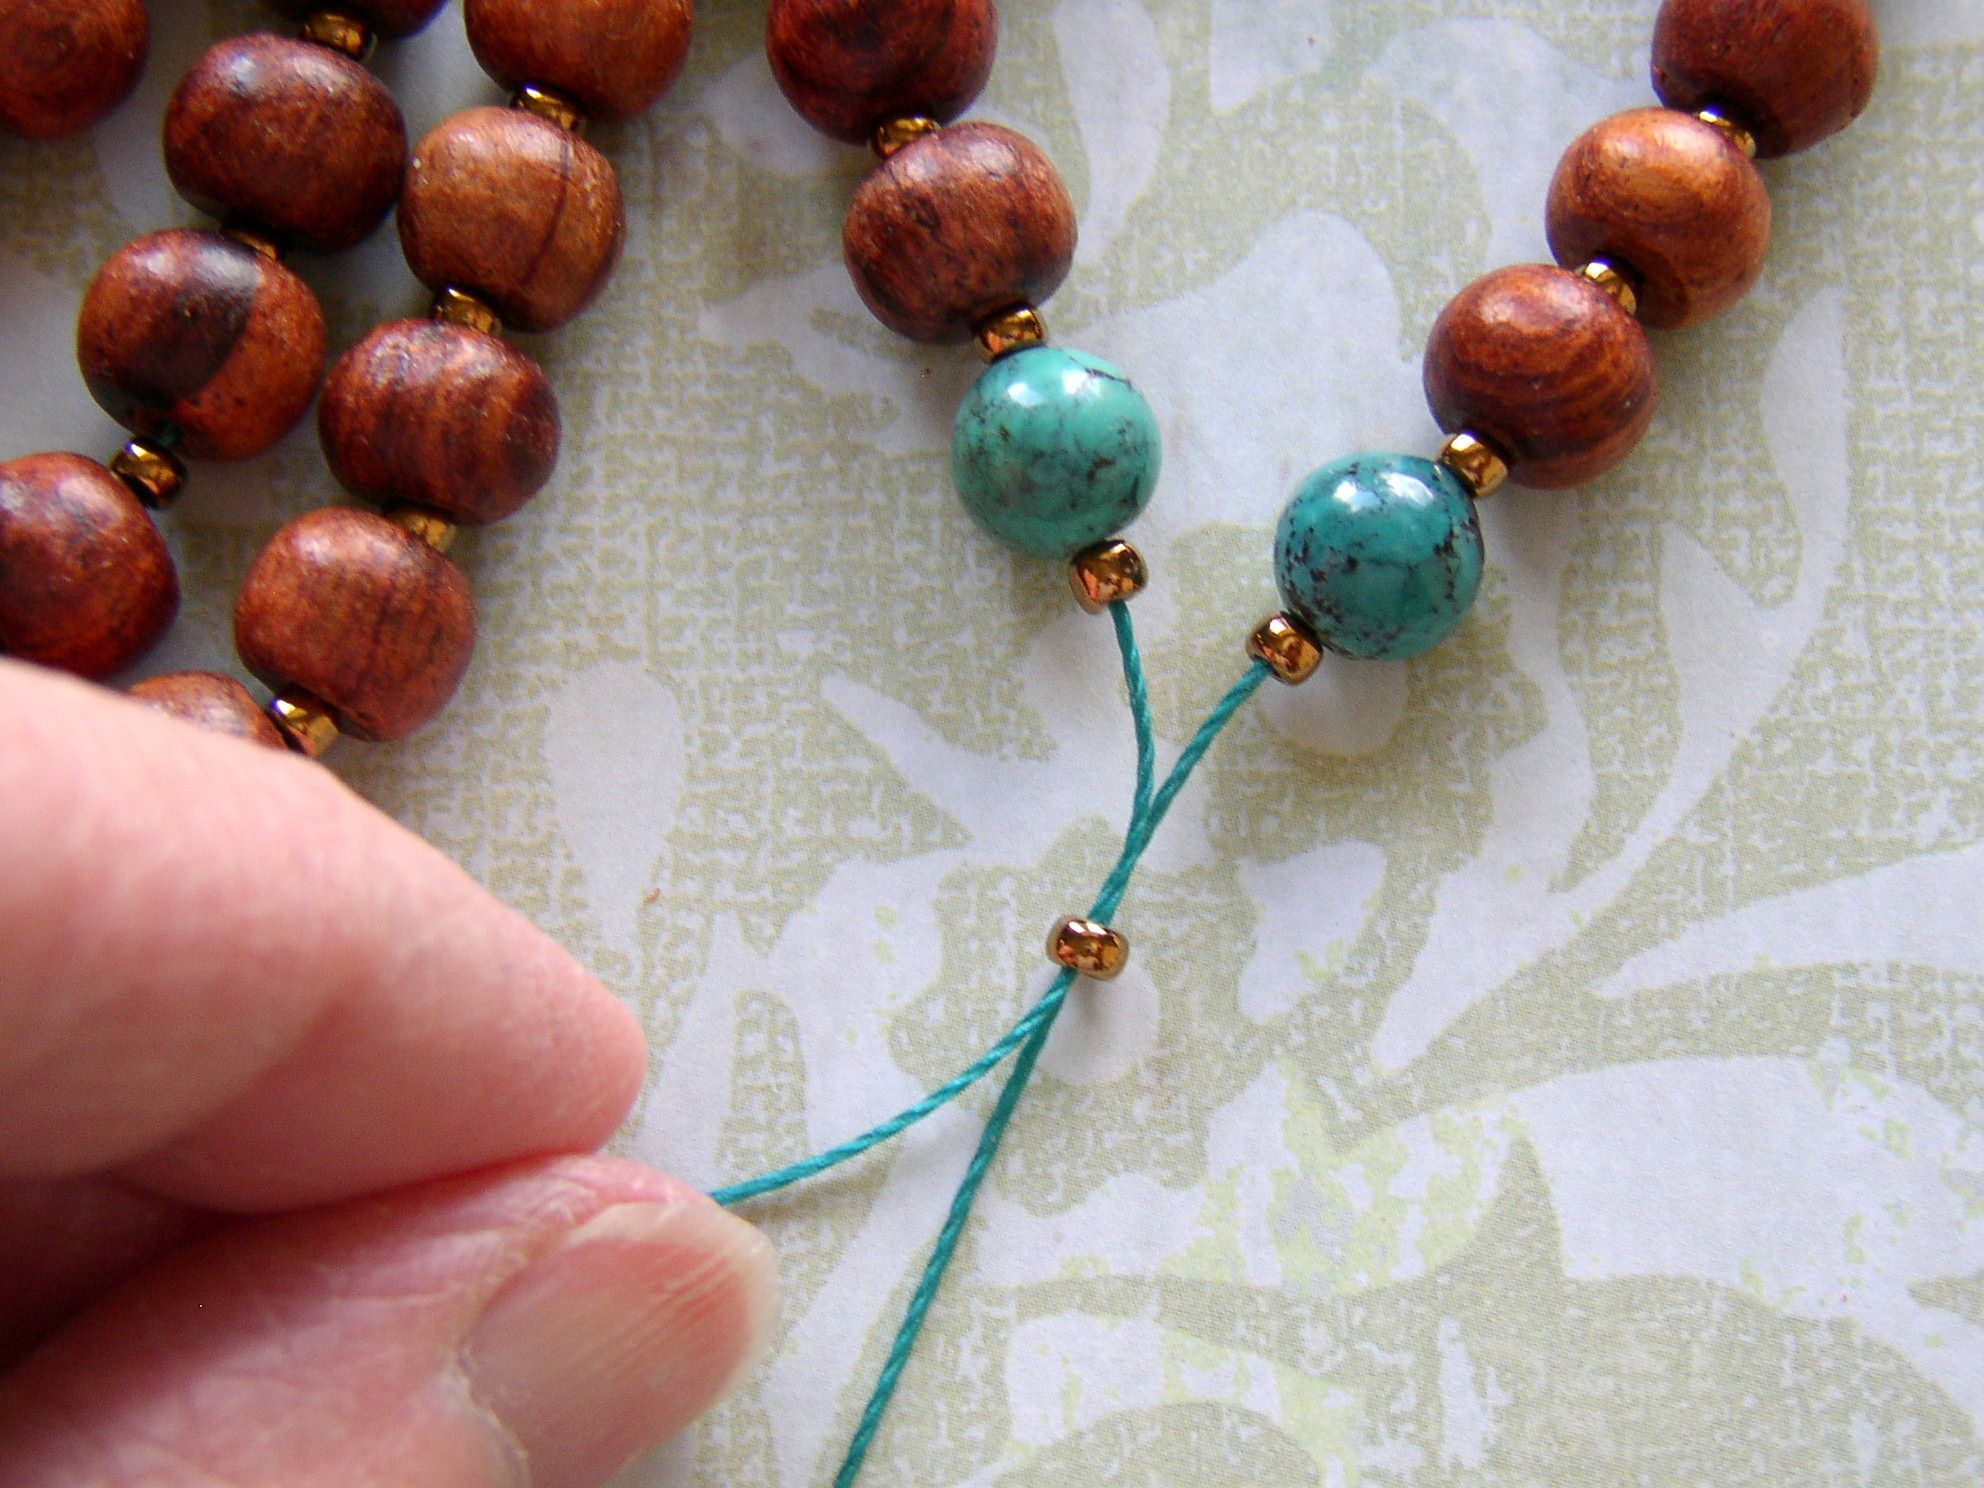 Turn The String Of Beads Into A Mala Necklacebringing The Ends Pertaining To Newest Strings Of Beads Rings (View 6 of 25)